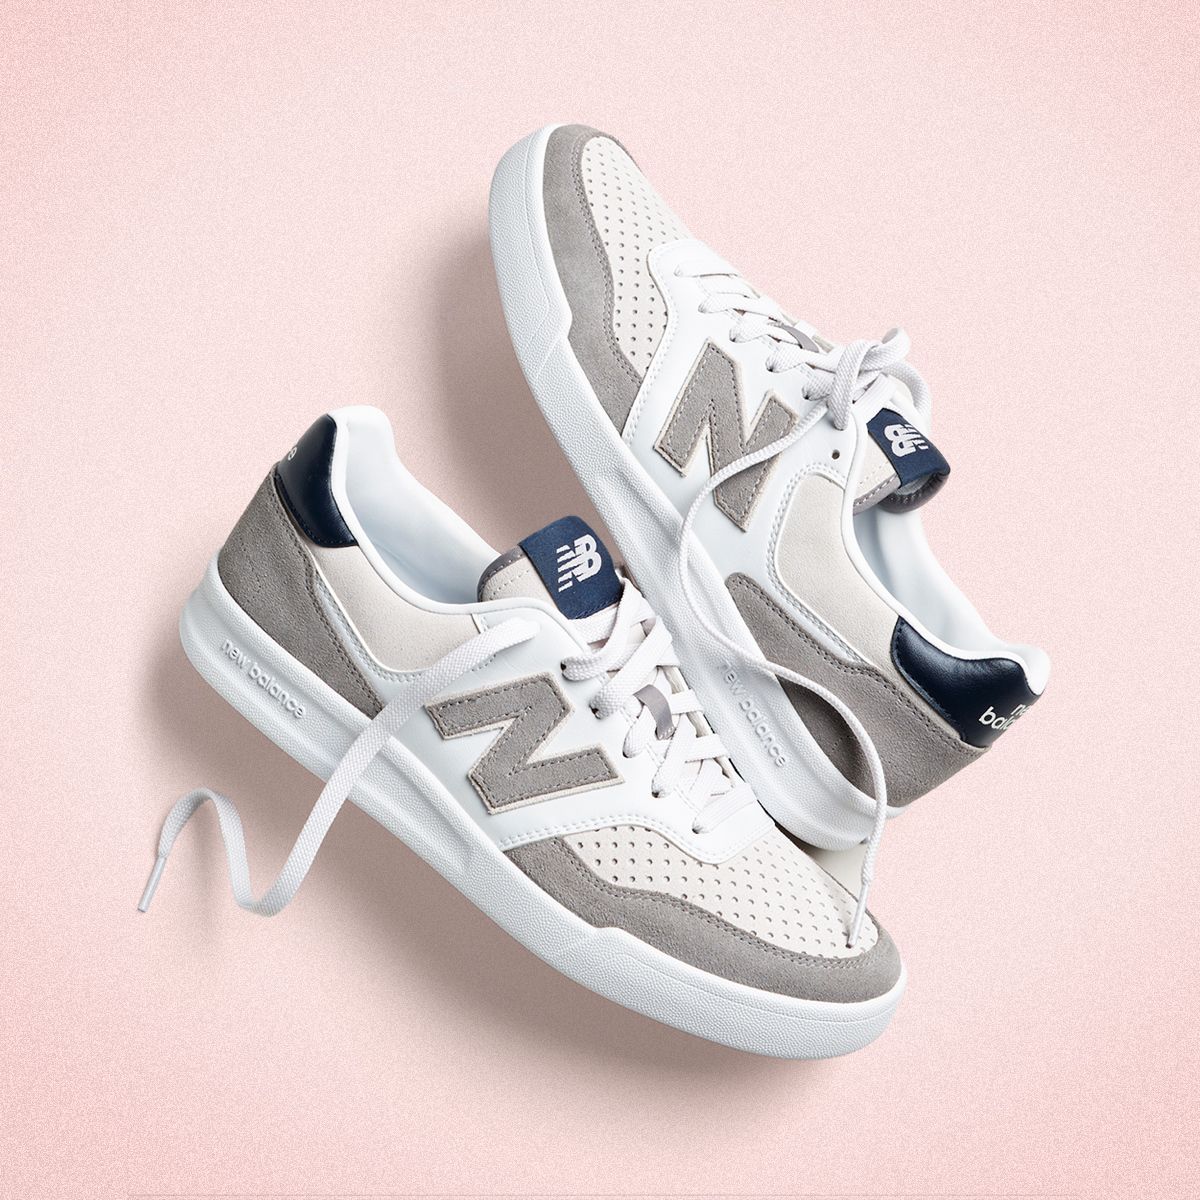 New x J.Crew CRT300 V2 Sneakers Release, Price, and Where to Buy